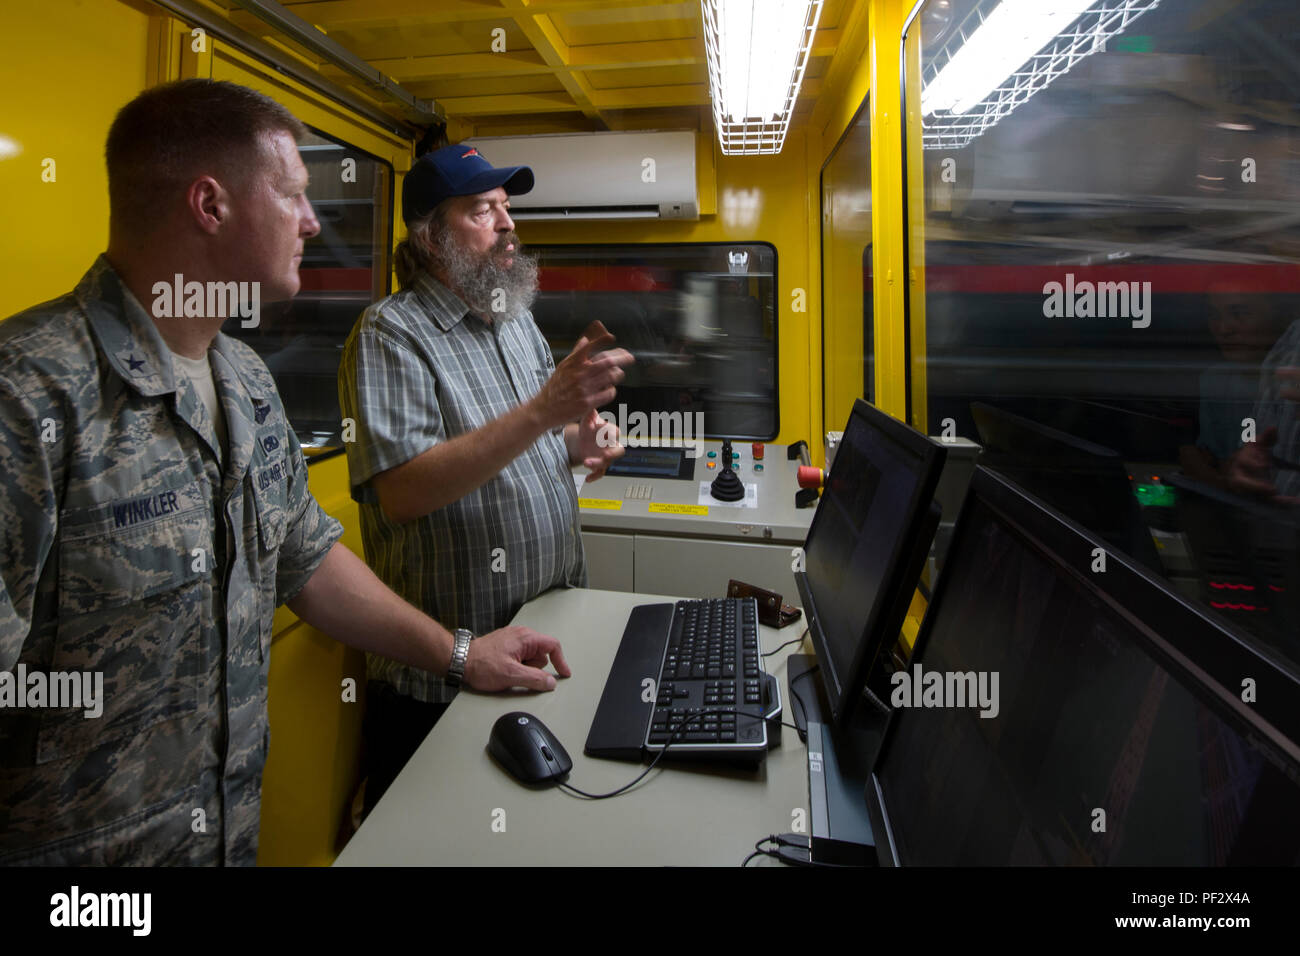 Brig. Gen. Michael Winkler, 5th Air Force vice commander, is briefed by Dean Labdon, 730th Air Mobility Squadron mechanized material handling system manager, on the MMHS capabilities at Yokota Air Base, Japan, Aug. 2, 2016, during his immersion tour. The automated system sorts, records and stores pallets in the warehouse based on their destination. (U.S. Air Force photo by Yasuo Osakabe/Released) Stock Photo